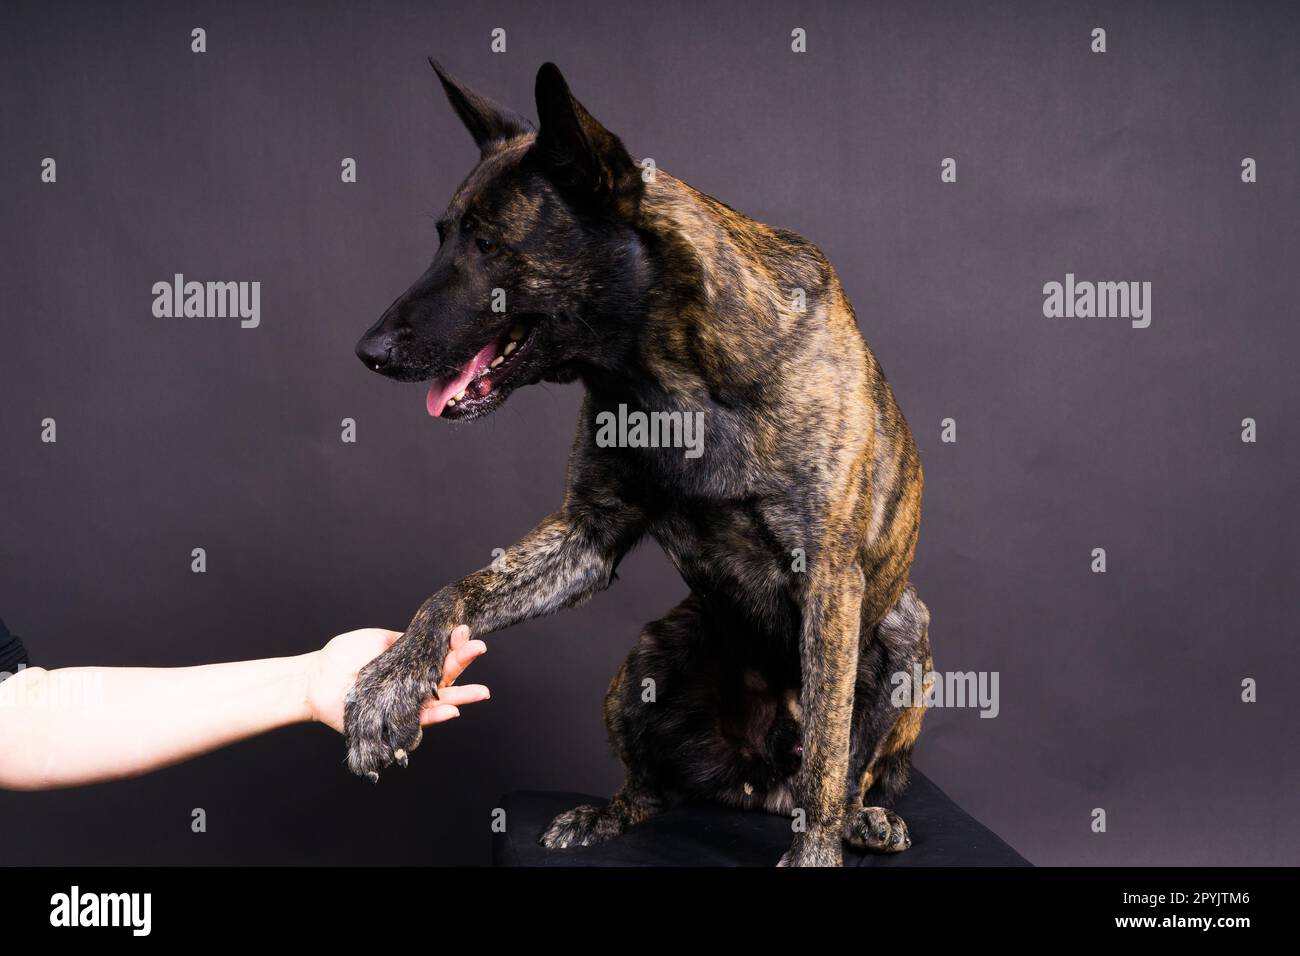 Friendship between Human and dog, feeding and taking paw in hand Stock Photo